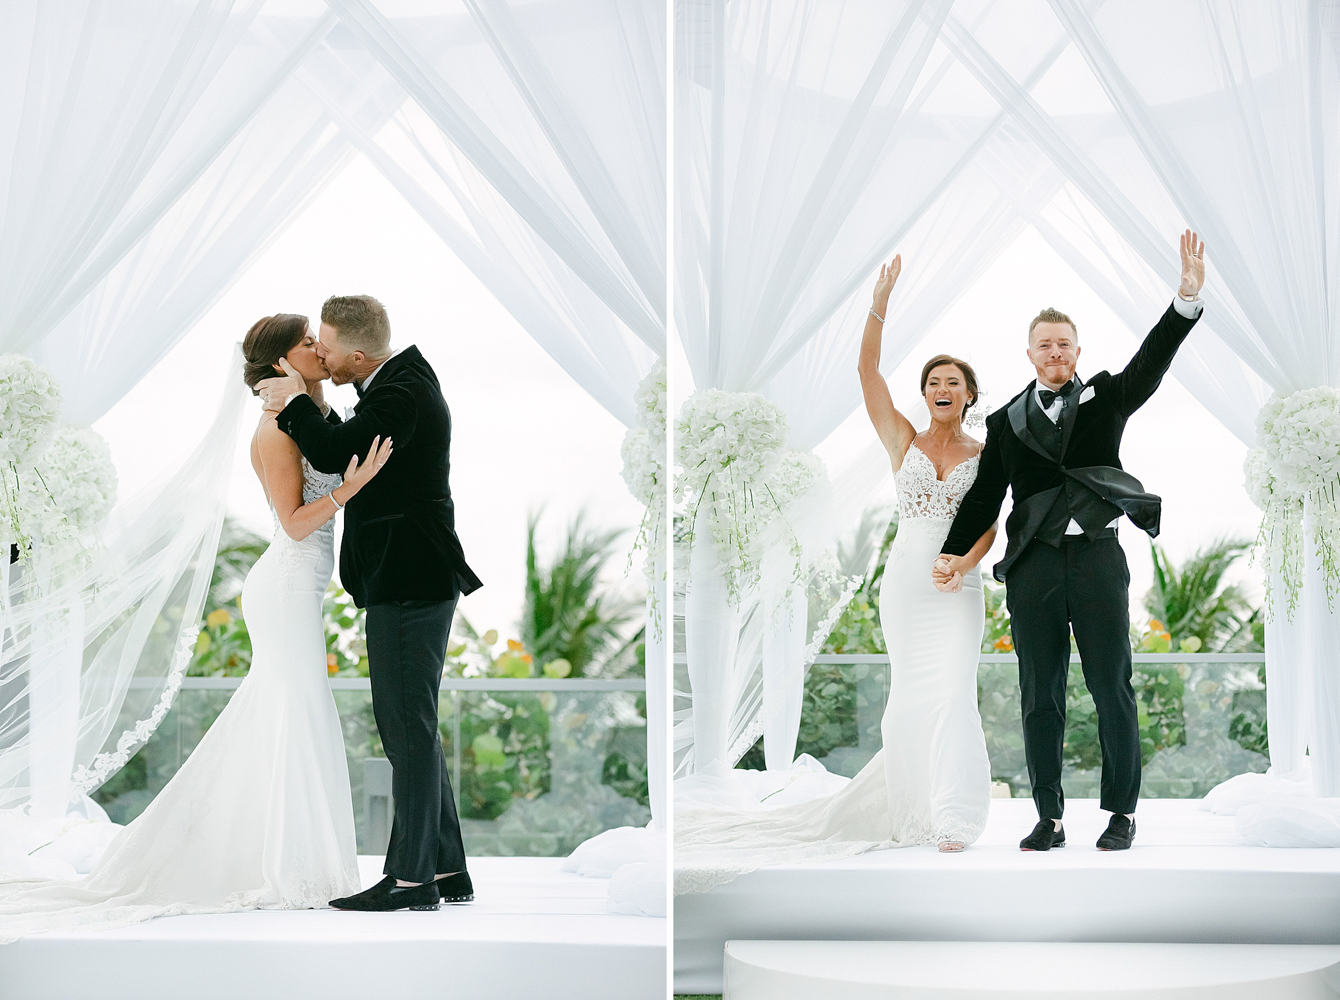 Bride and groom exchange their first kiss under their white Chuppah